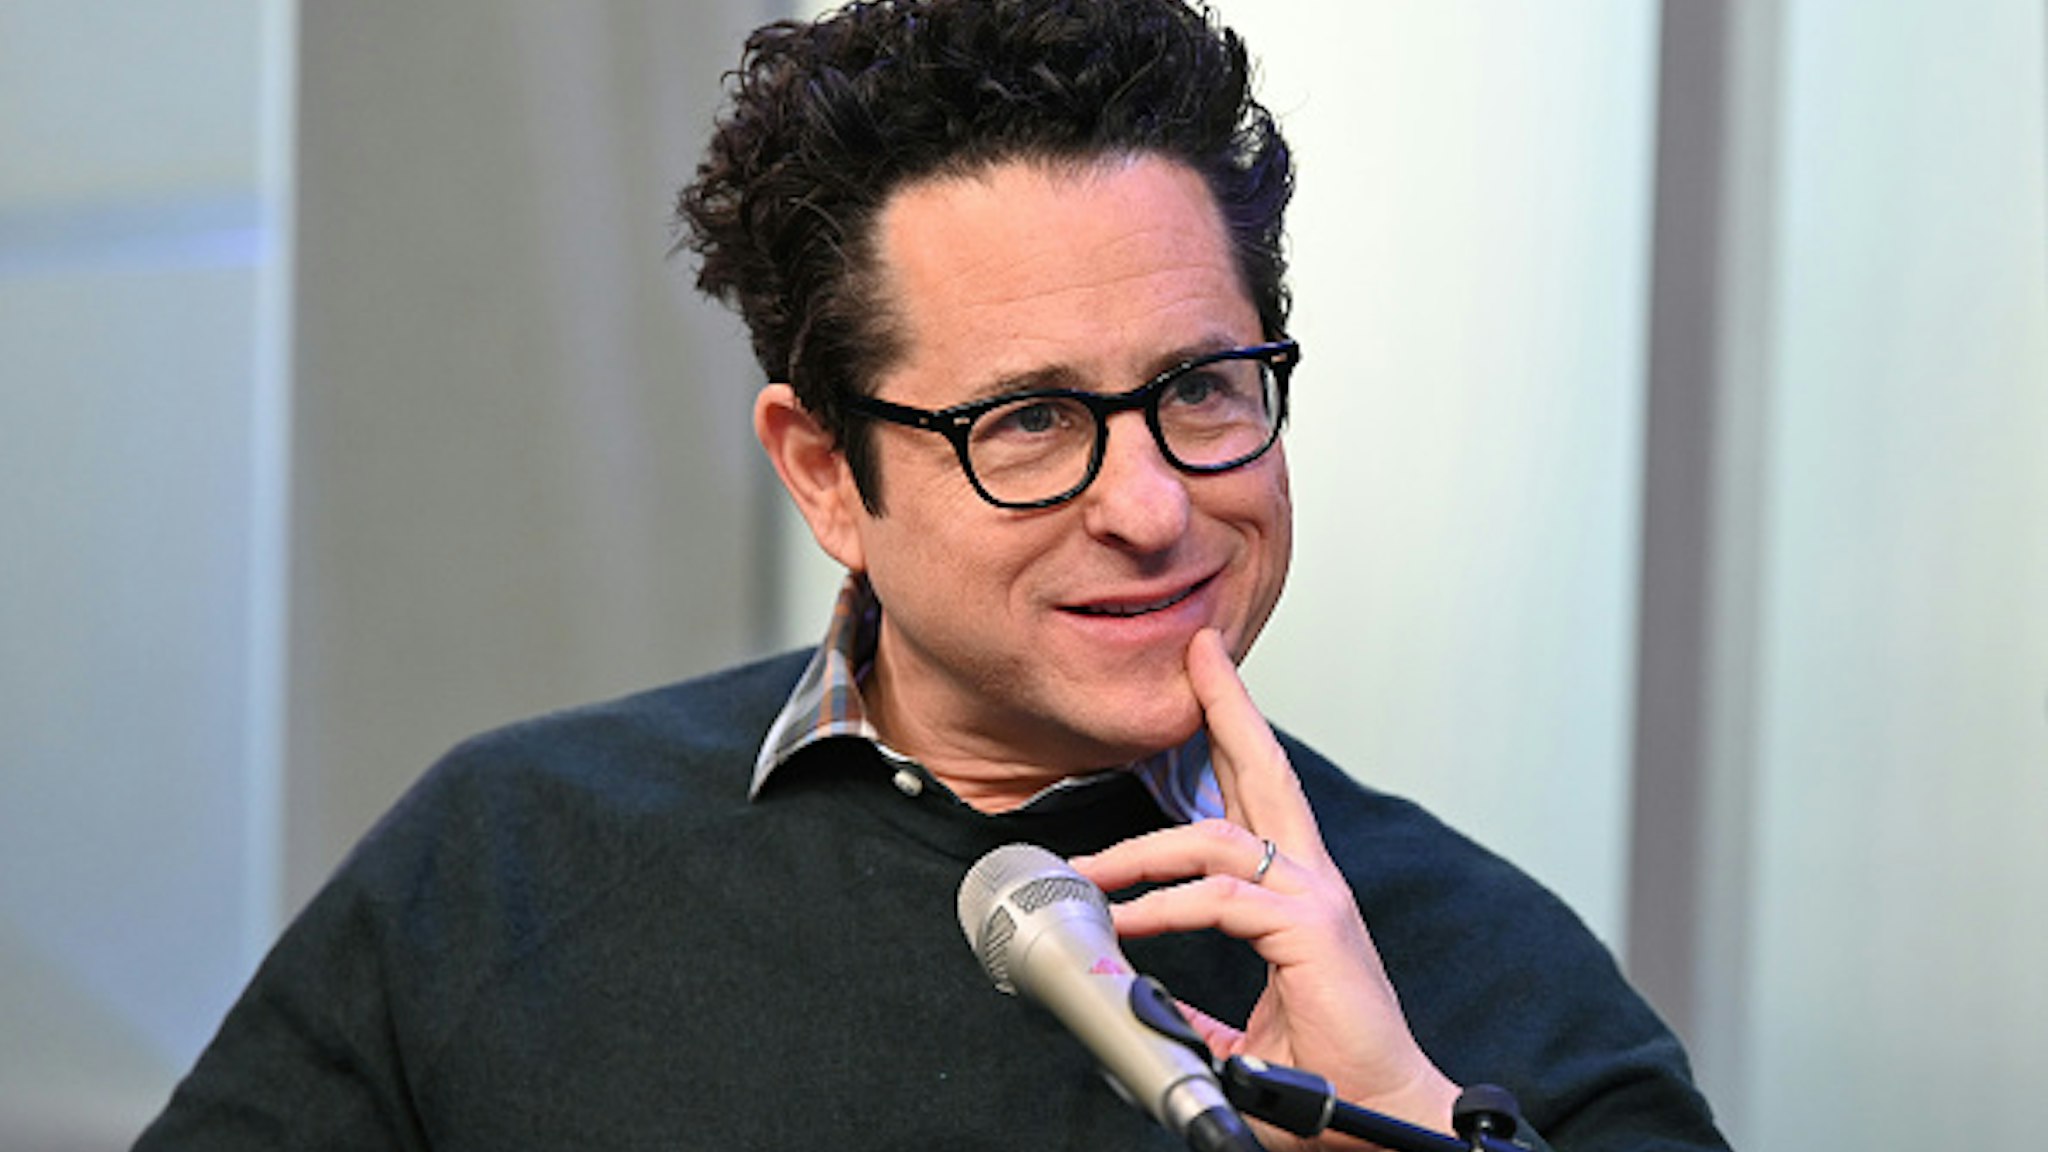 NEW YORK, NEW YORK - NOVEMBER 25: (EXCLUSIVE COVERAGE) Filmmaker J.J. Abrams visits Entertainment Weekly at SiriusXM Studios to discuss “Star Wars: The Rise of Skywalker” on November 25, 2019 in New York City.